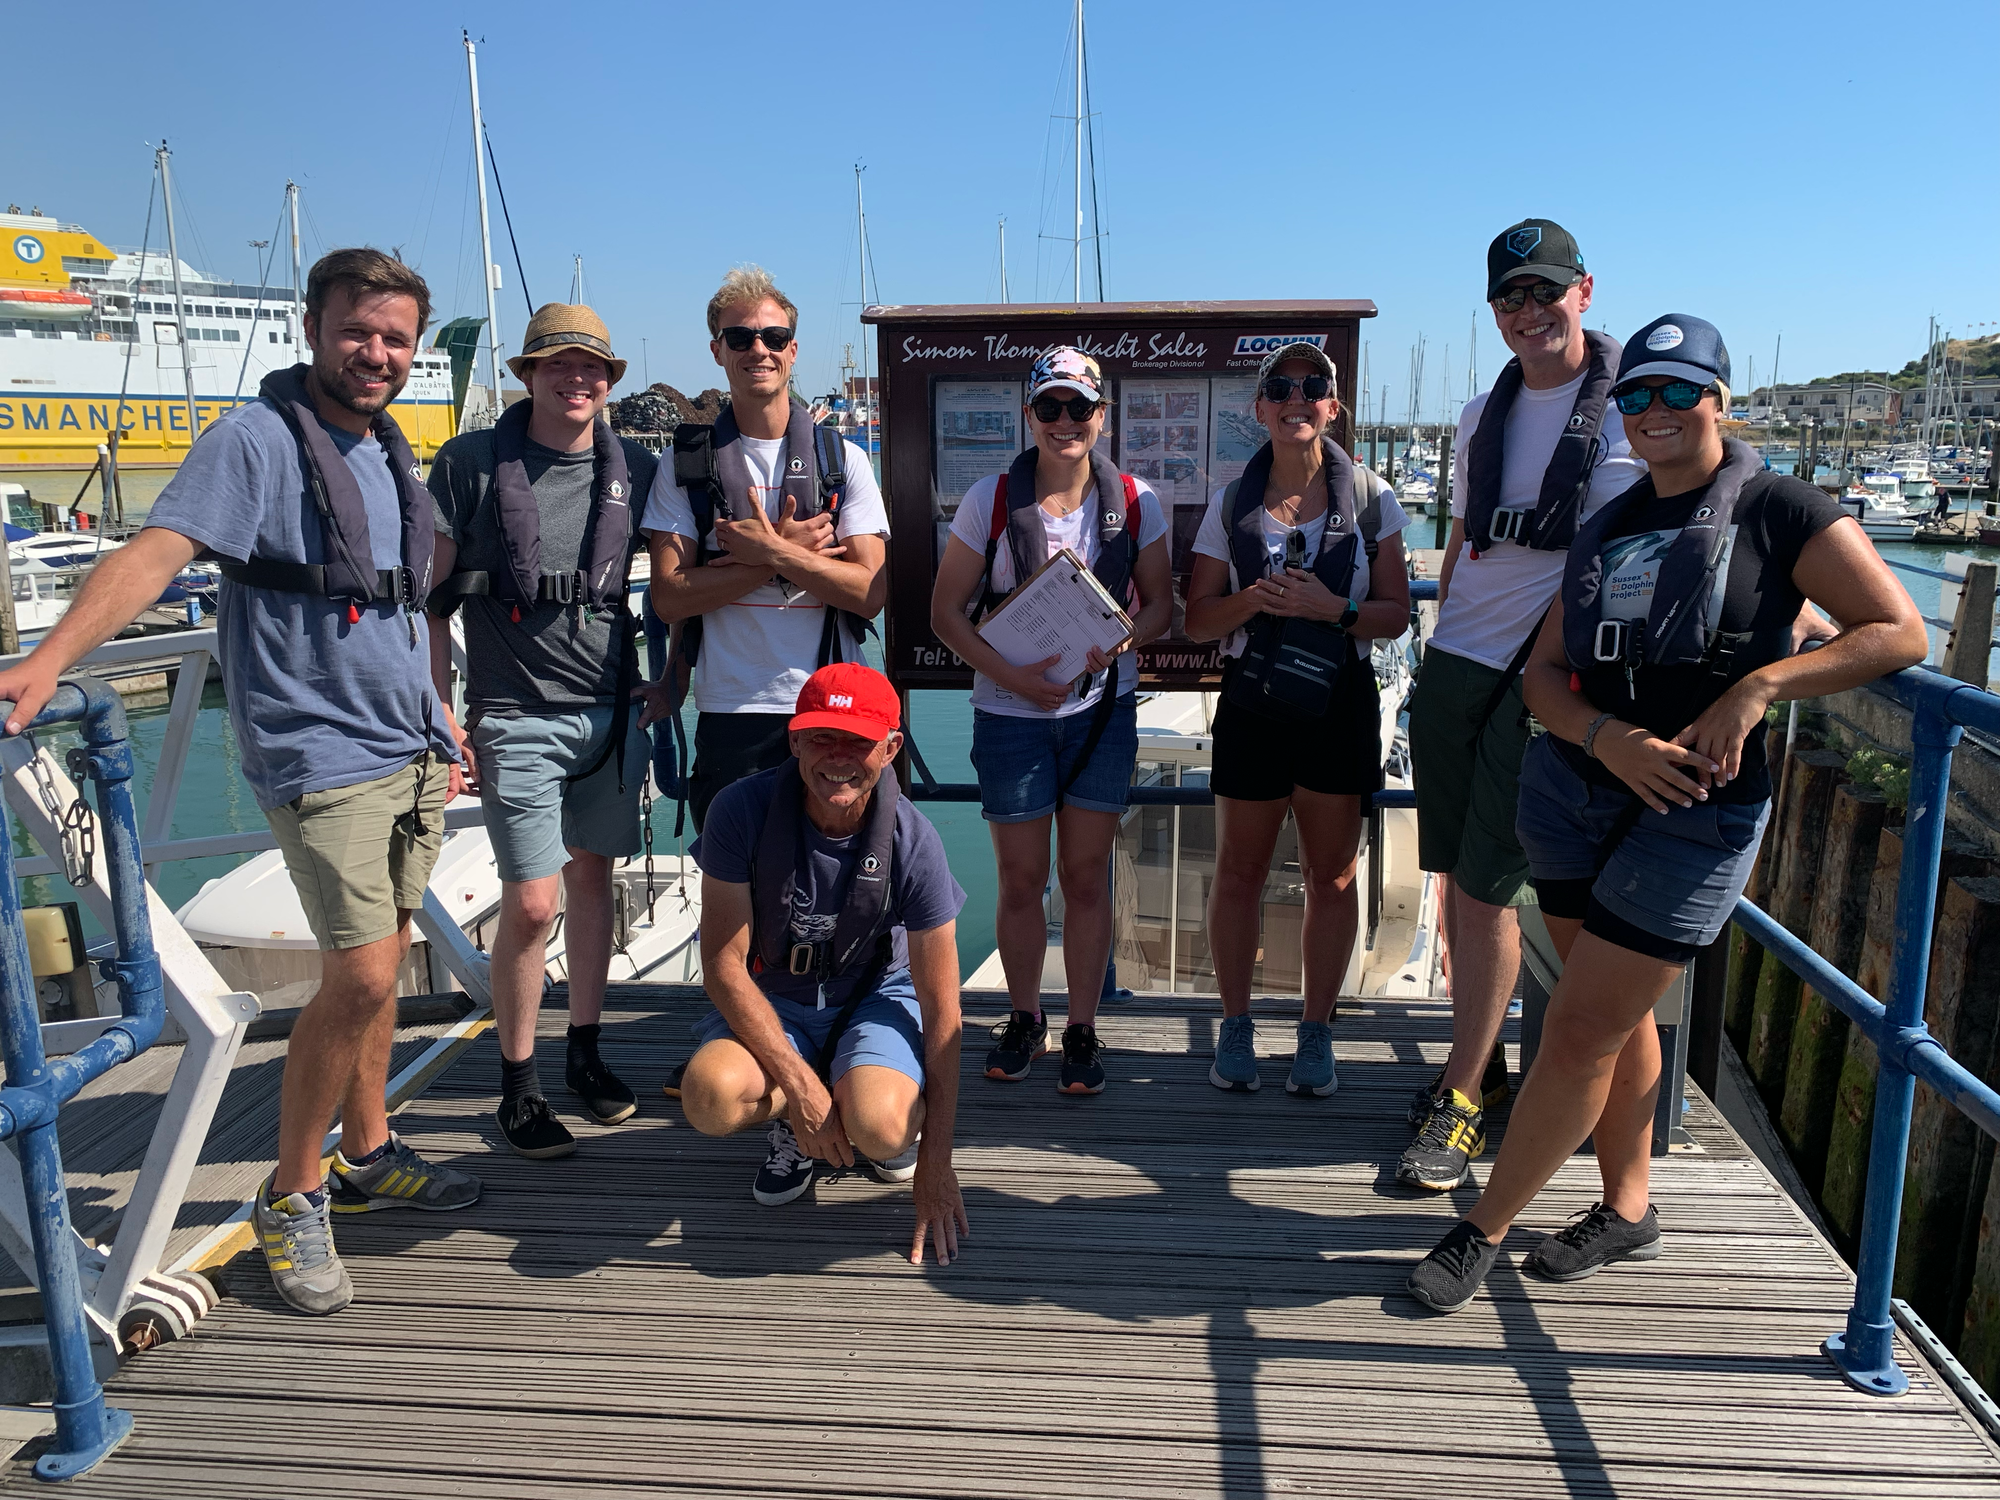 A photo of the team taken at Newhaven just before they went out on a research boat trip this summer.